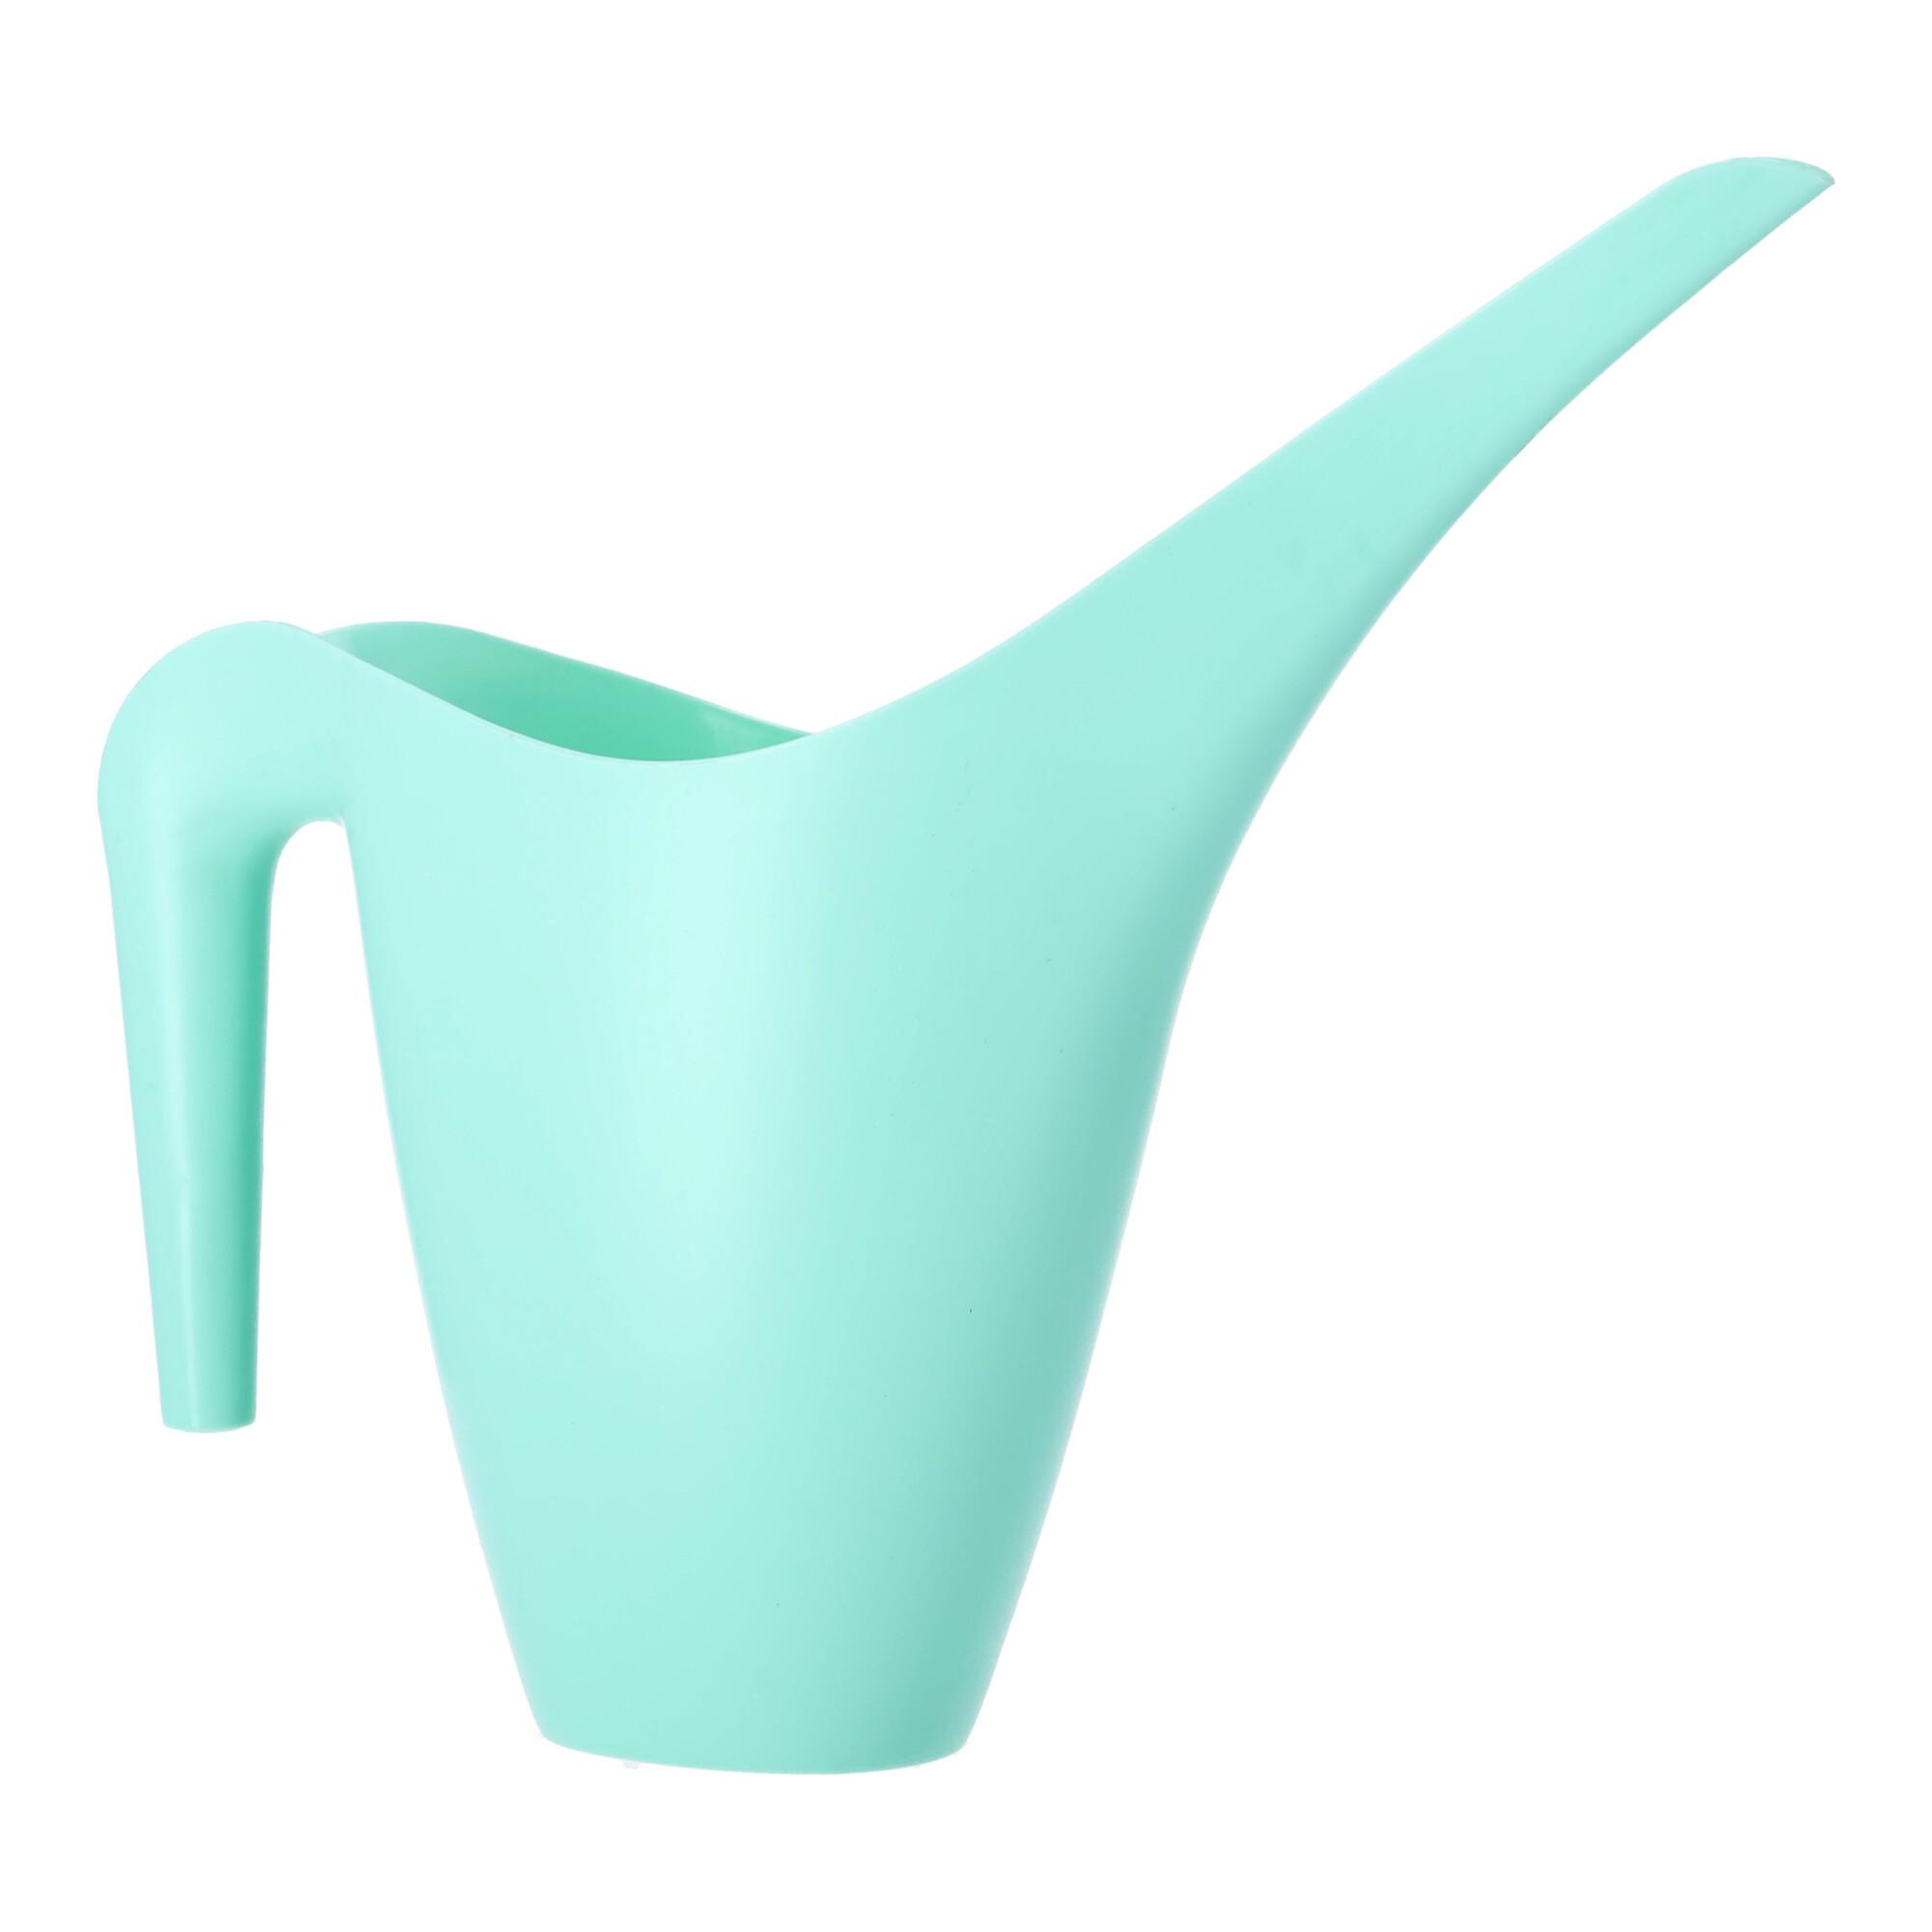 Garden, home watering can 1.5 L - mint